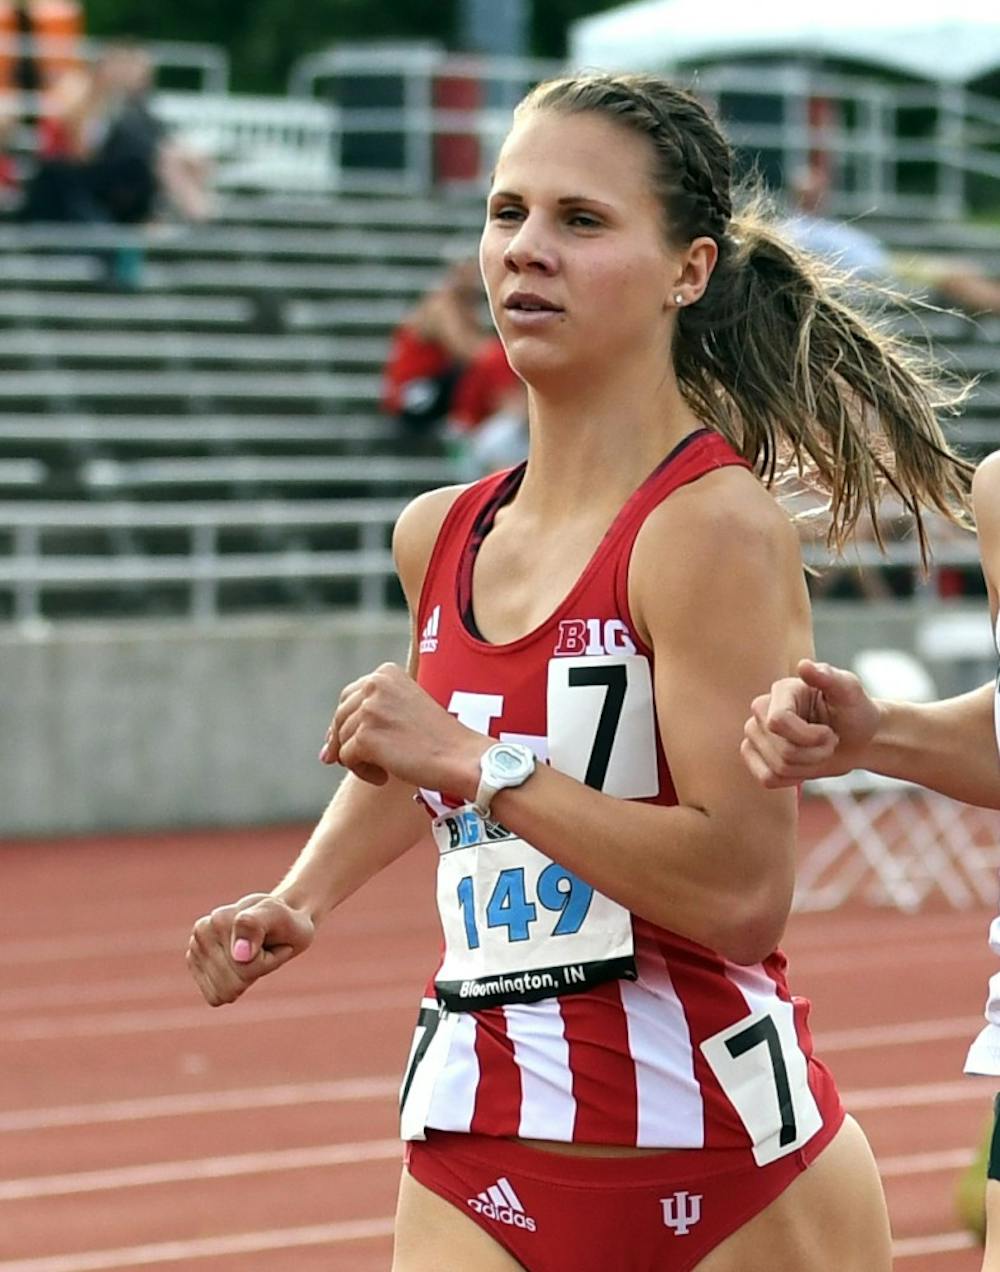 <p>Senior Brenna Calder competes in the 1,500-meter run during the Big Ten Outdoor Track and Field Championships on Friday at IU's Robert C. Haugh Track and Field Complex. Calder qualified for the finals in the 1500-meter run on day one of the NCAA Prelims on Thursday in Tampa, Florida.</p>